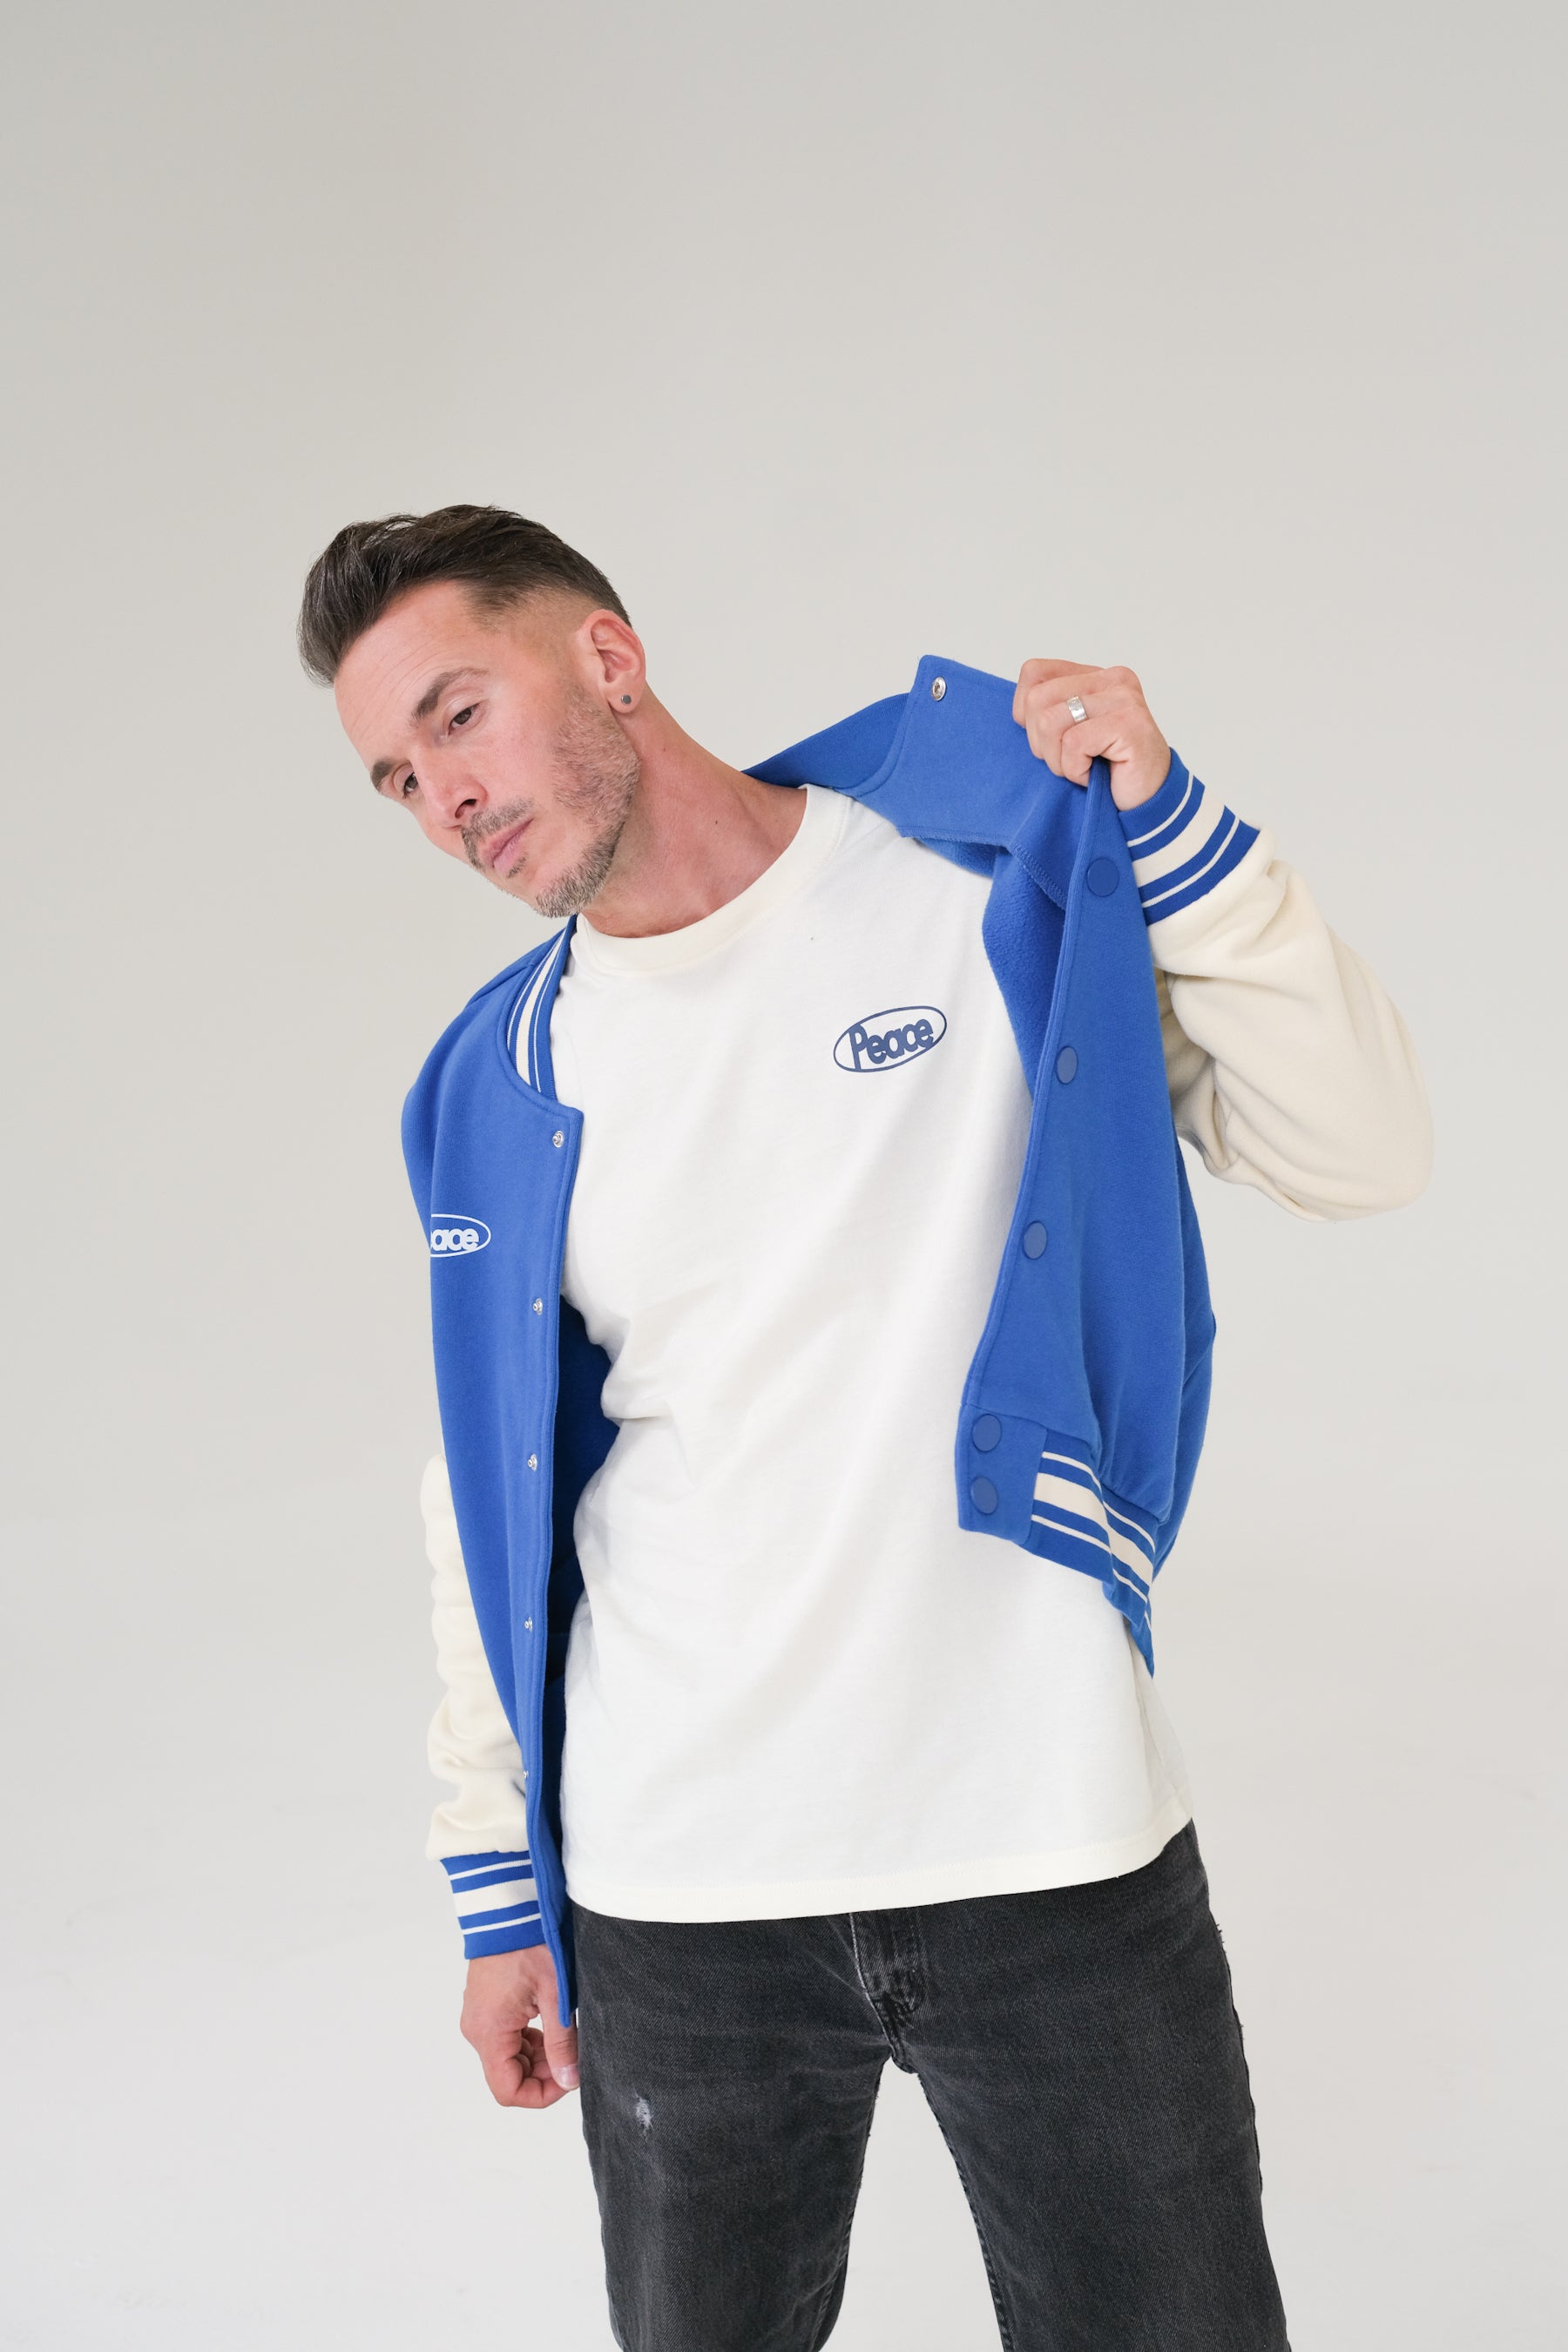 Peace Collective Better Together Letterman Jacket - Royal/Cream